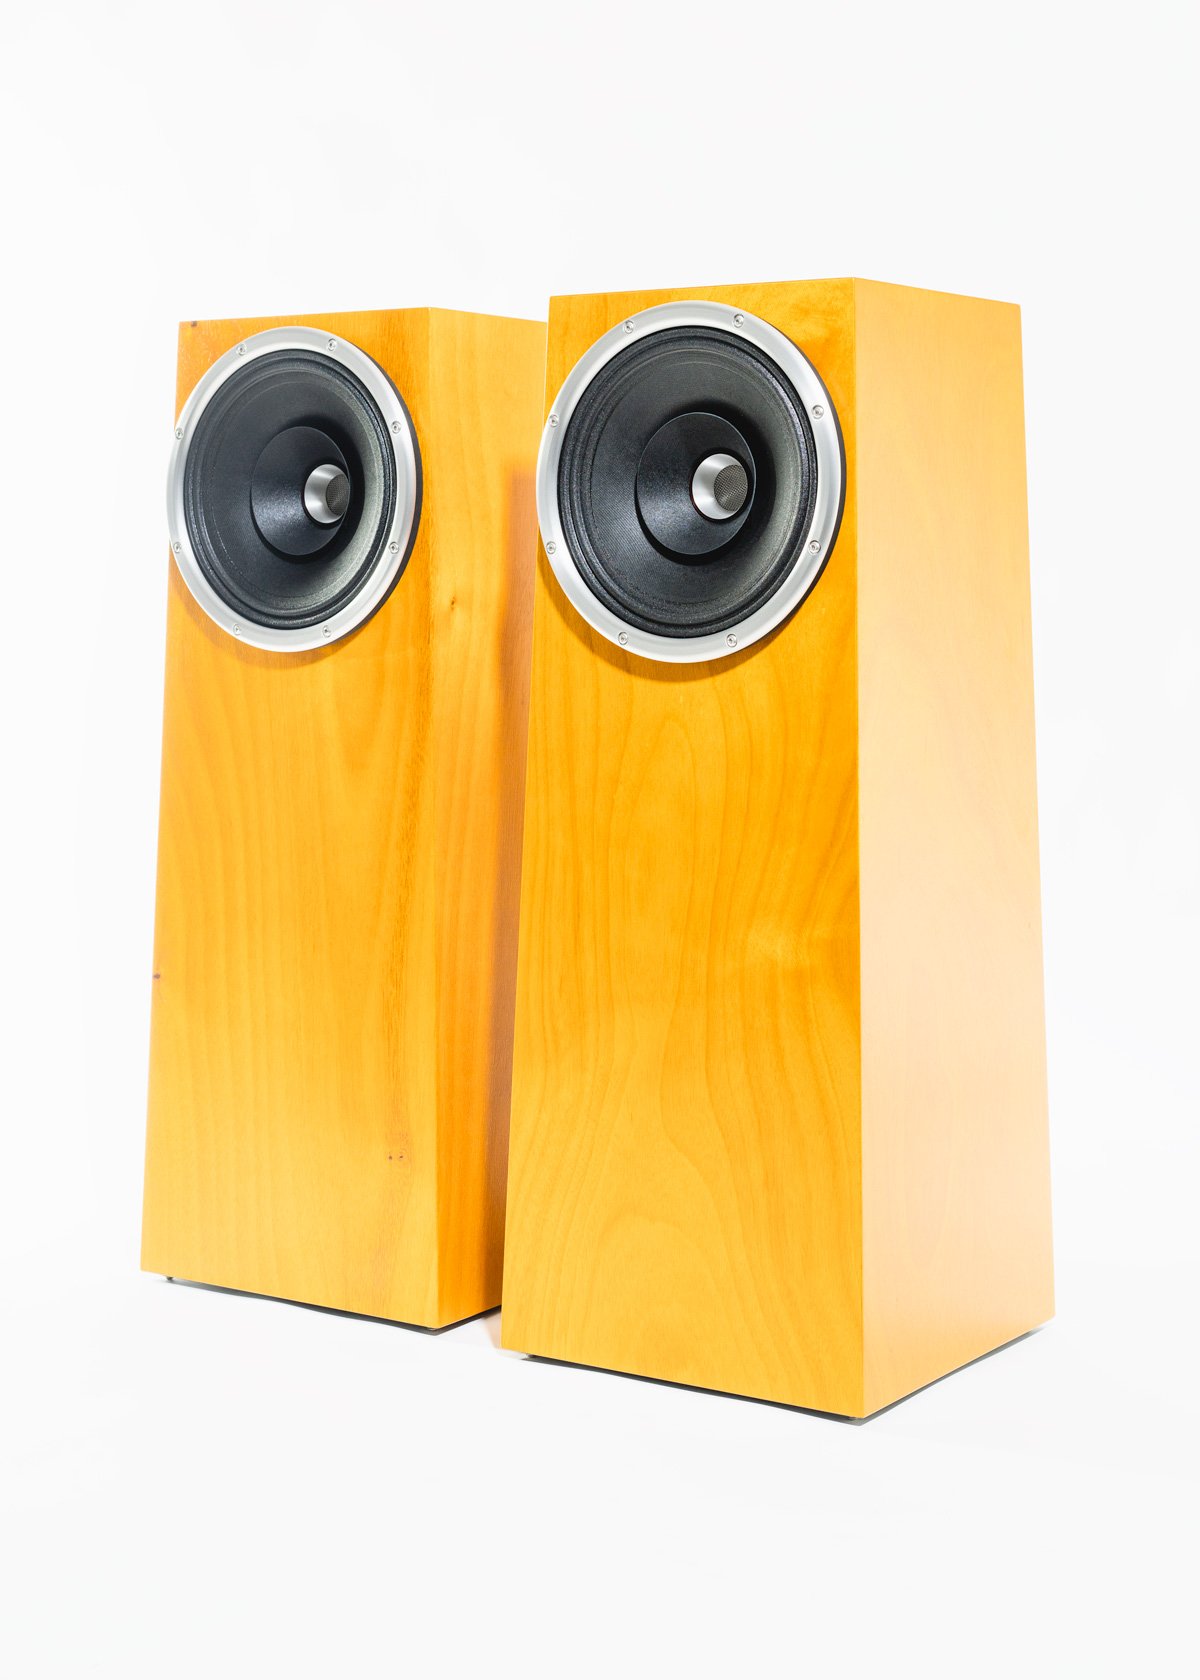 Vervreemden Oppositie cilinder Soul 6 | Zu Audio | Hi-Fi audio speakers and cables hand built in the USA